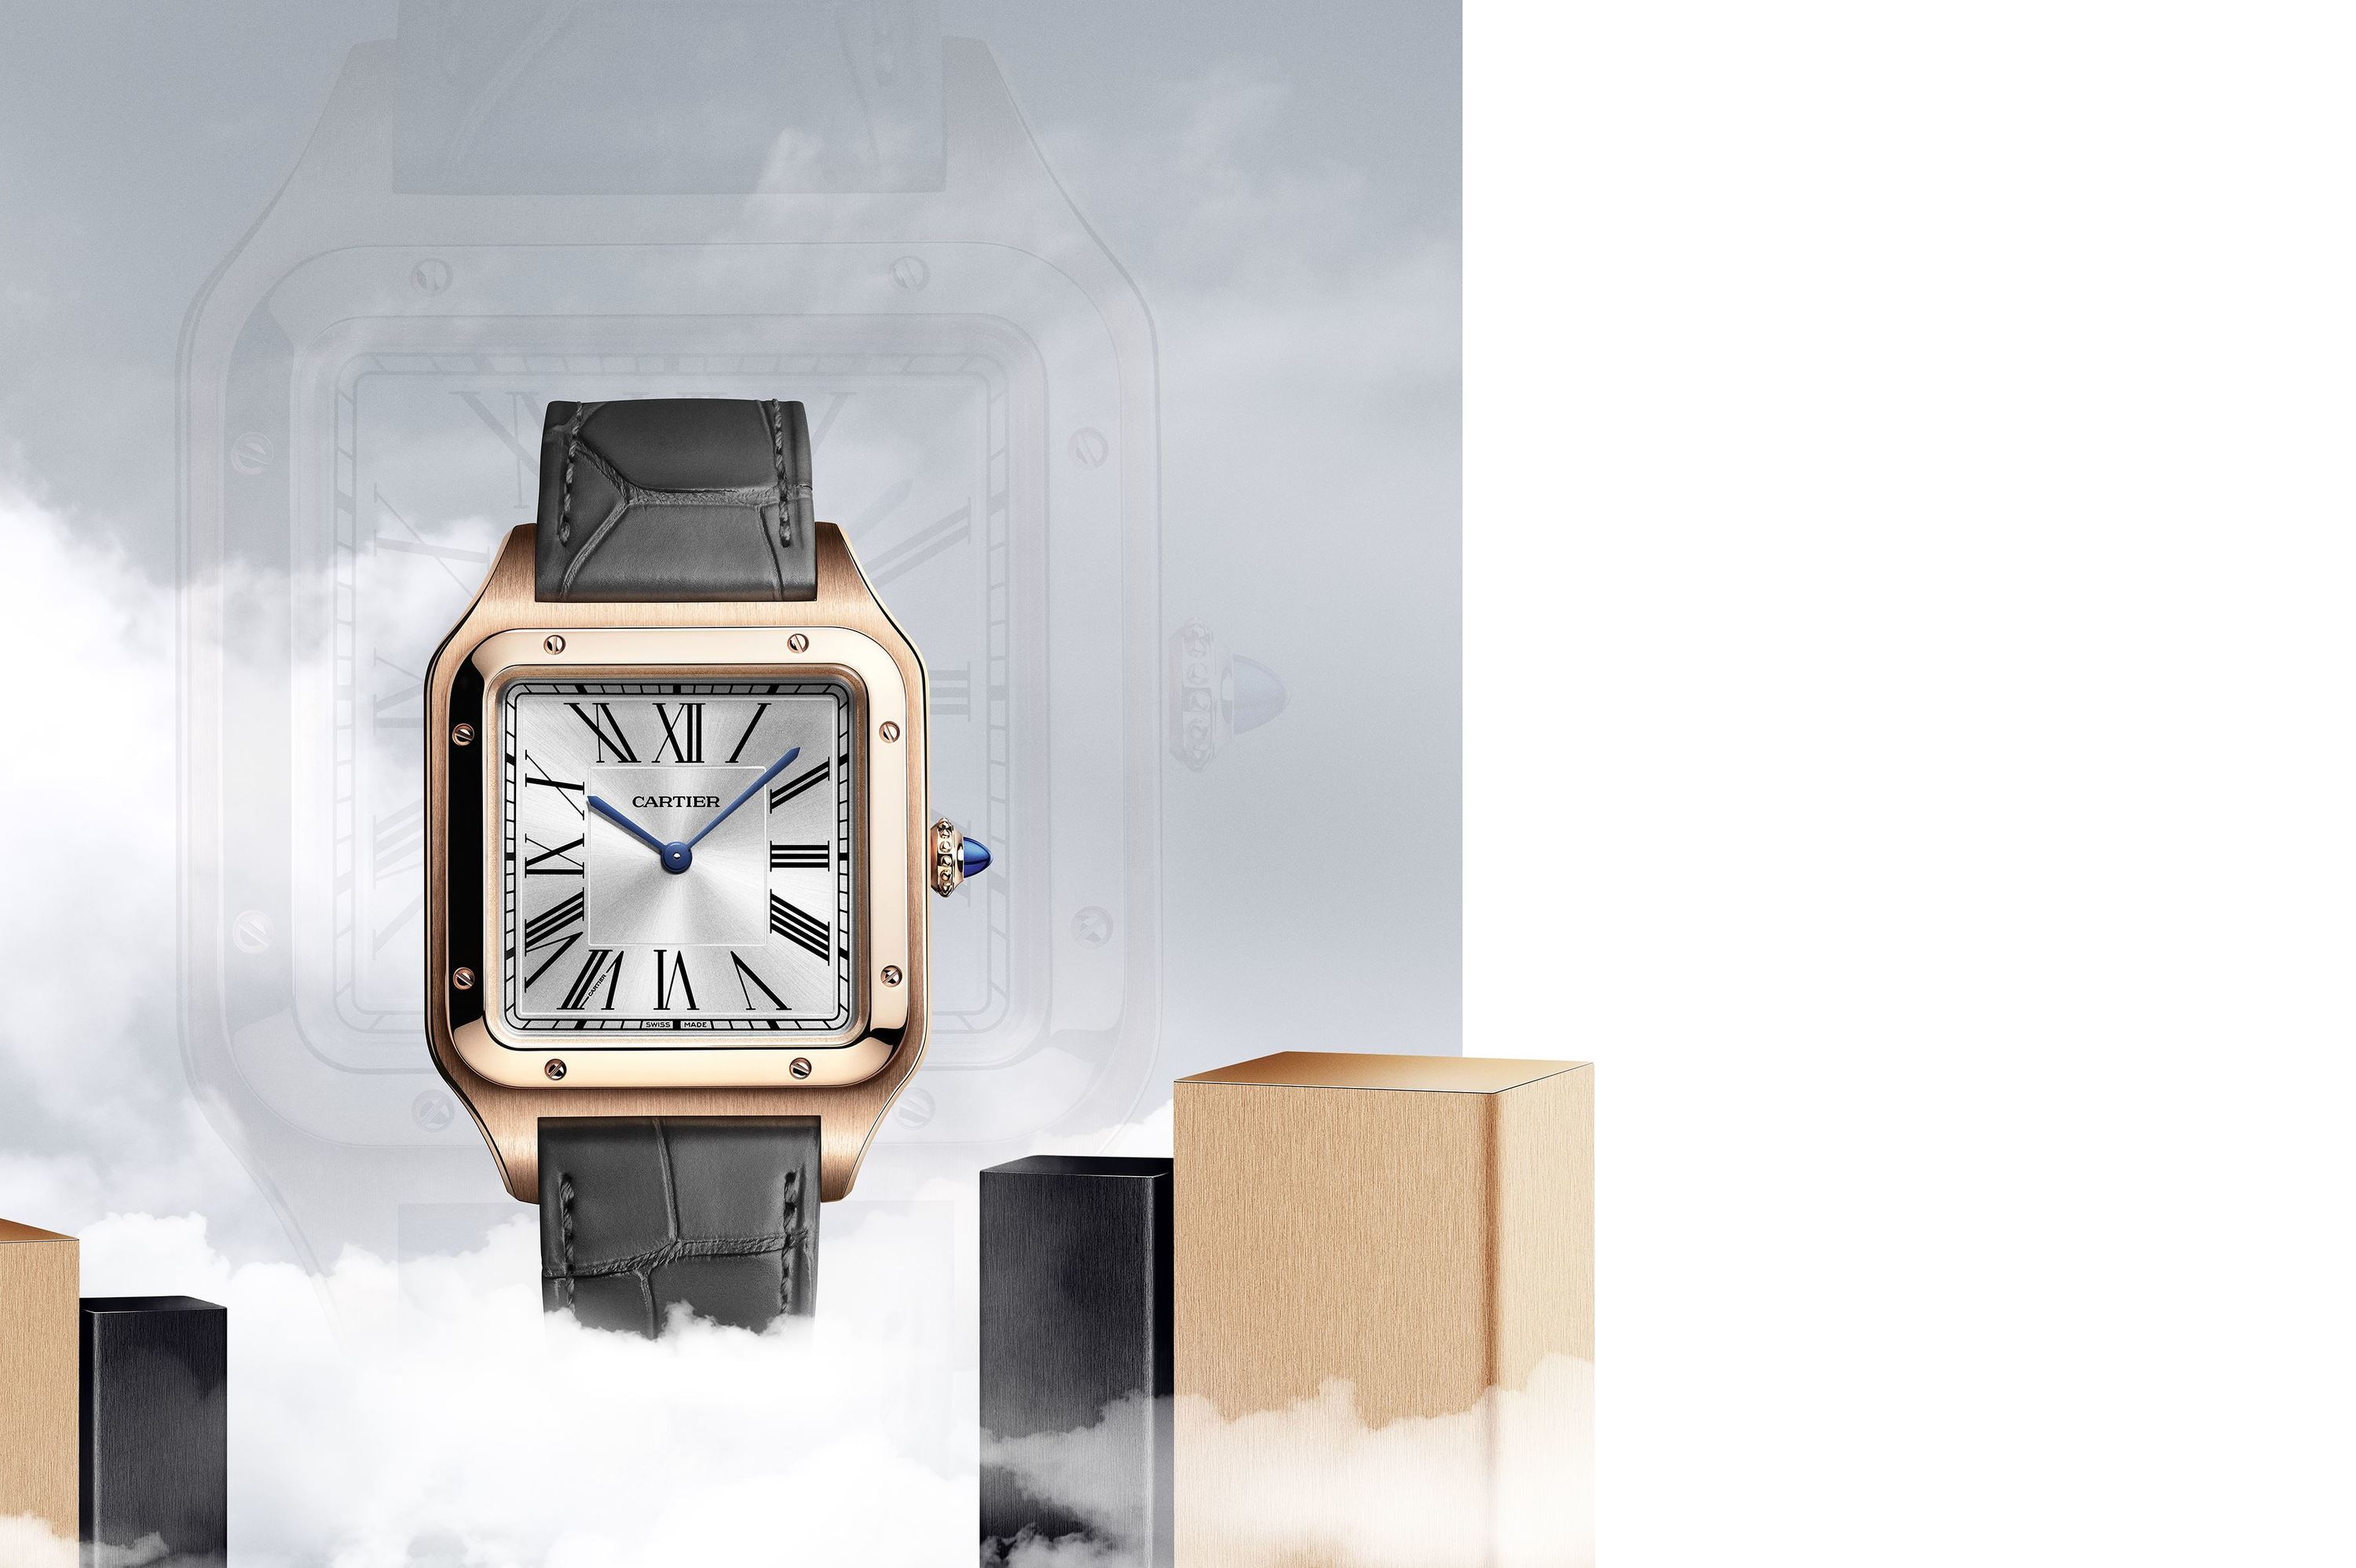 Cartier drops a microsite to launch new 